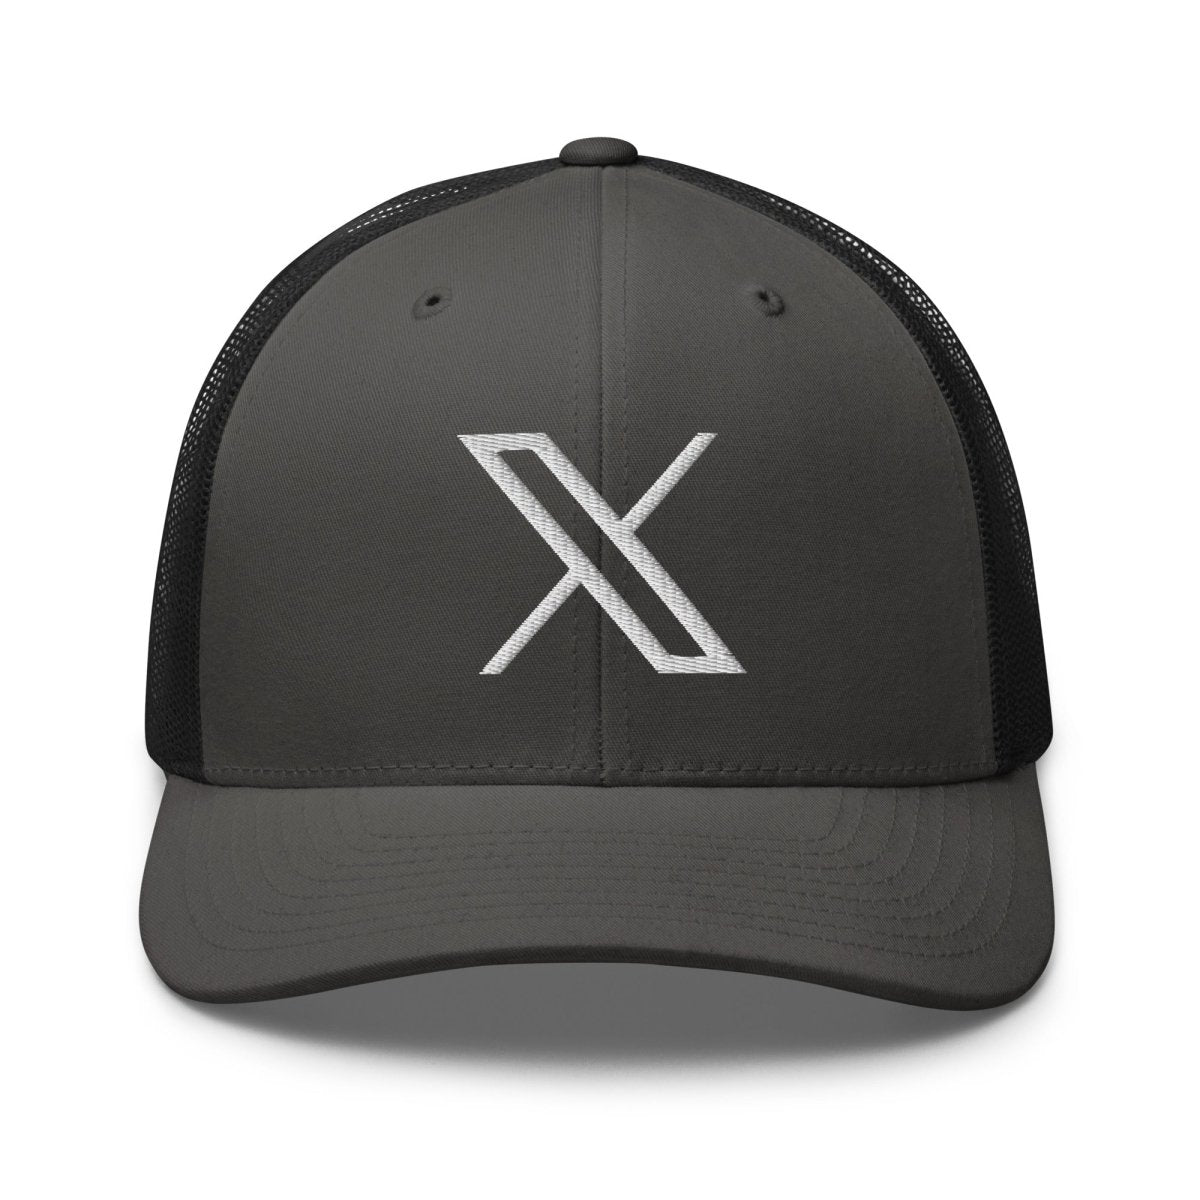 Twitter X Logo Embroidered Trucker Cap - Charcoal/ Black - AI Store